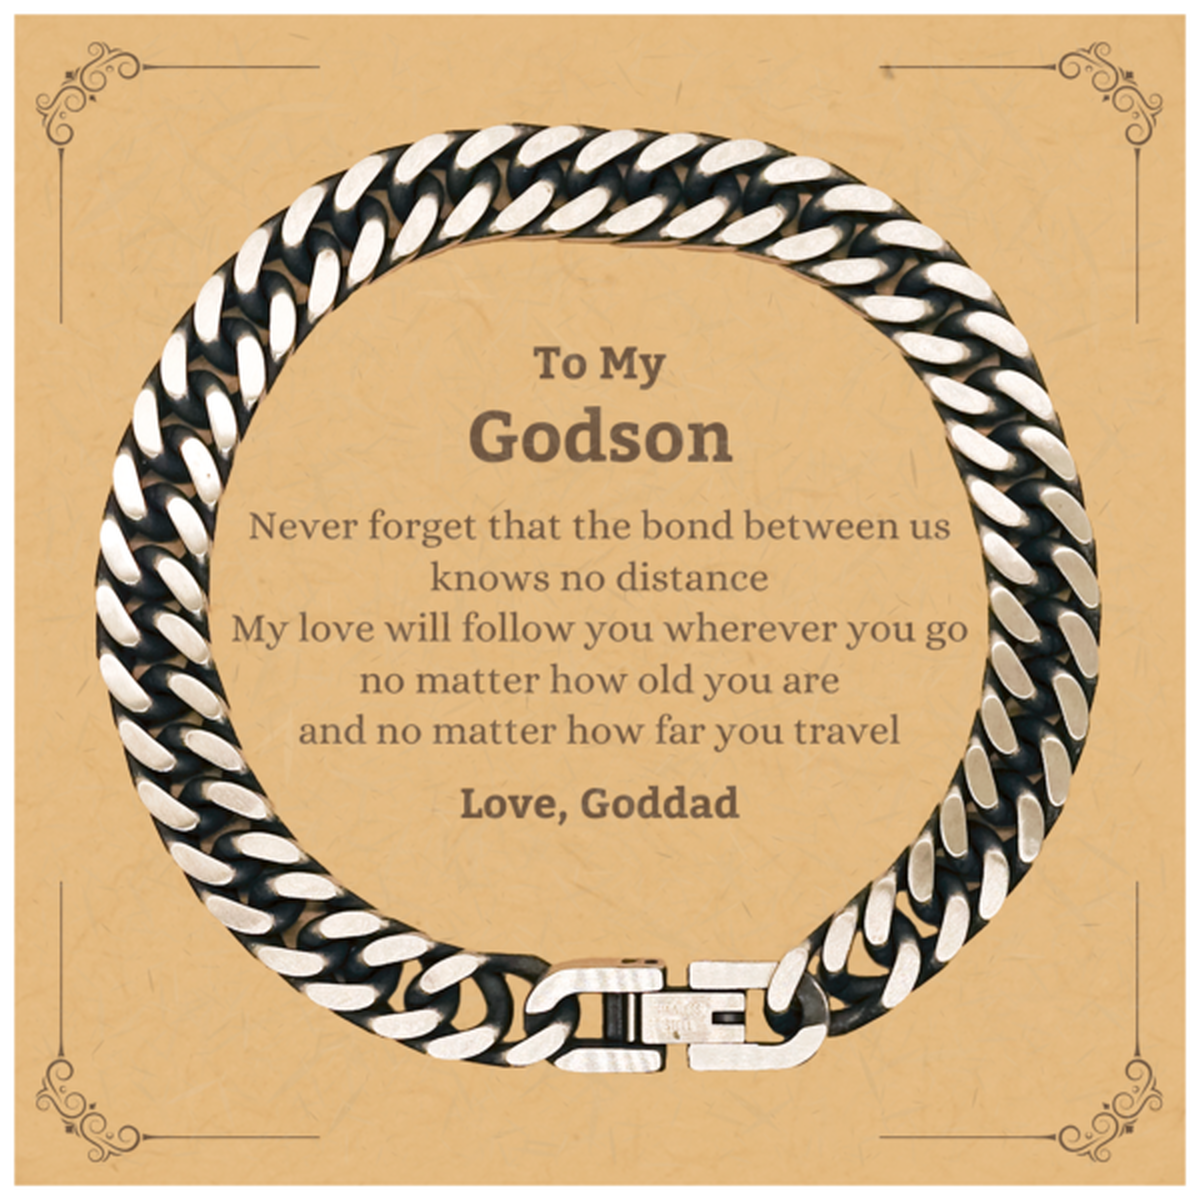 Godson Birthday Gifts from Goddad, Adjustable Cuban Link Chain Bracelet for Godson Christmas Graduation Unique Gifts Godson Never forget that the bond between us knows no distance. Love, Goddad